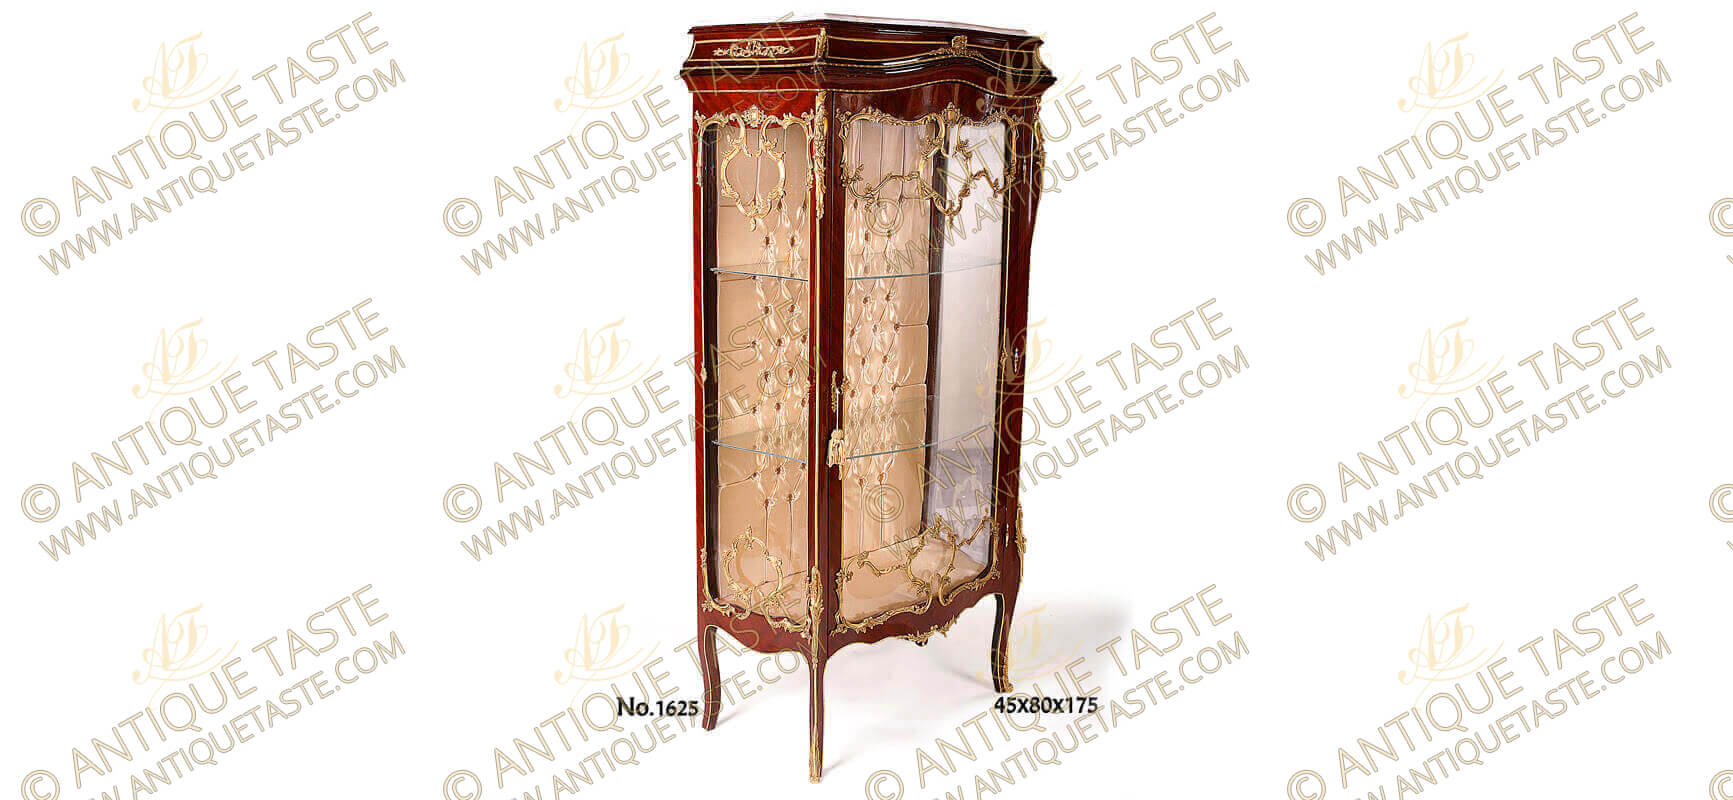 French style XV Vitrine, Cabinet, Reproductions Louis Display XVI Furniture Louis Corner